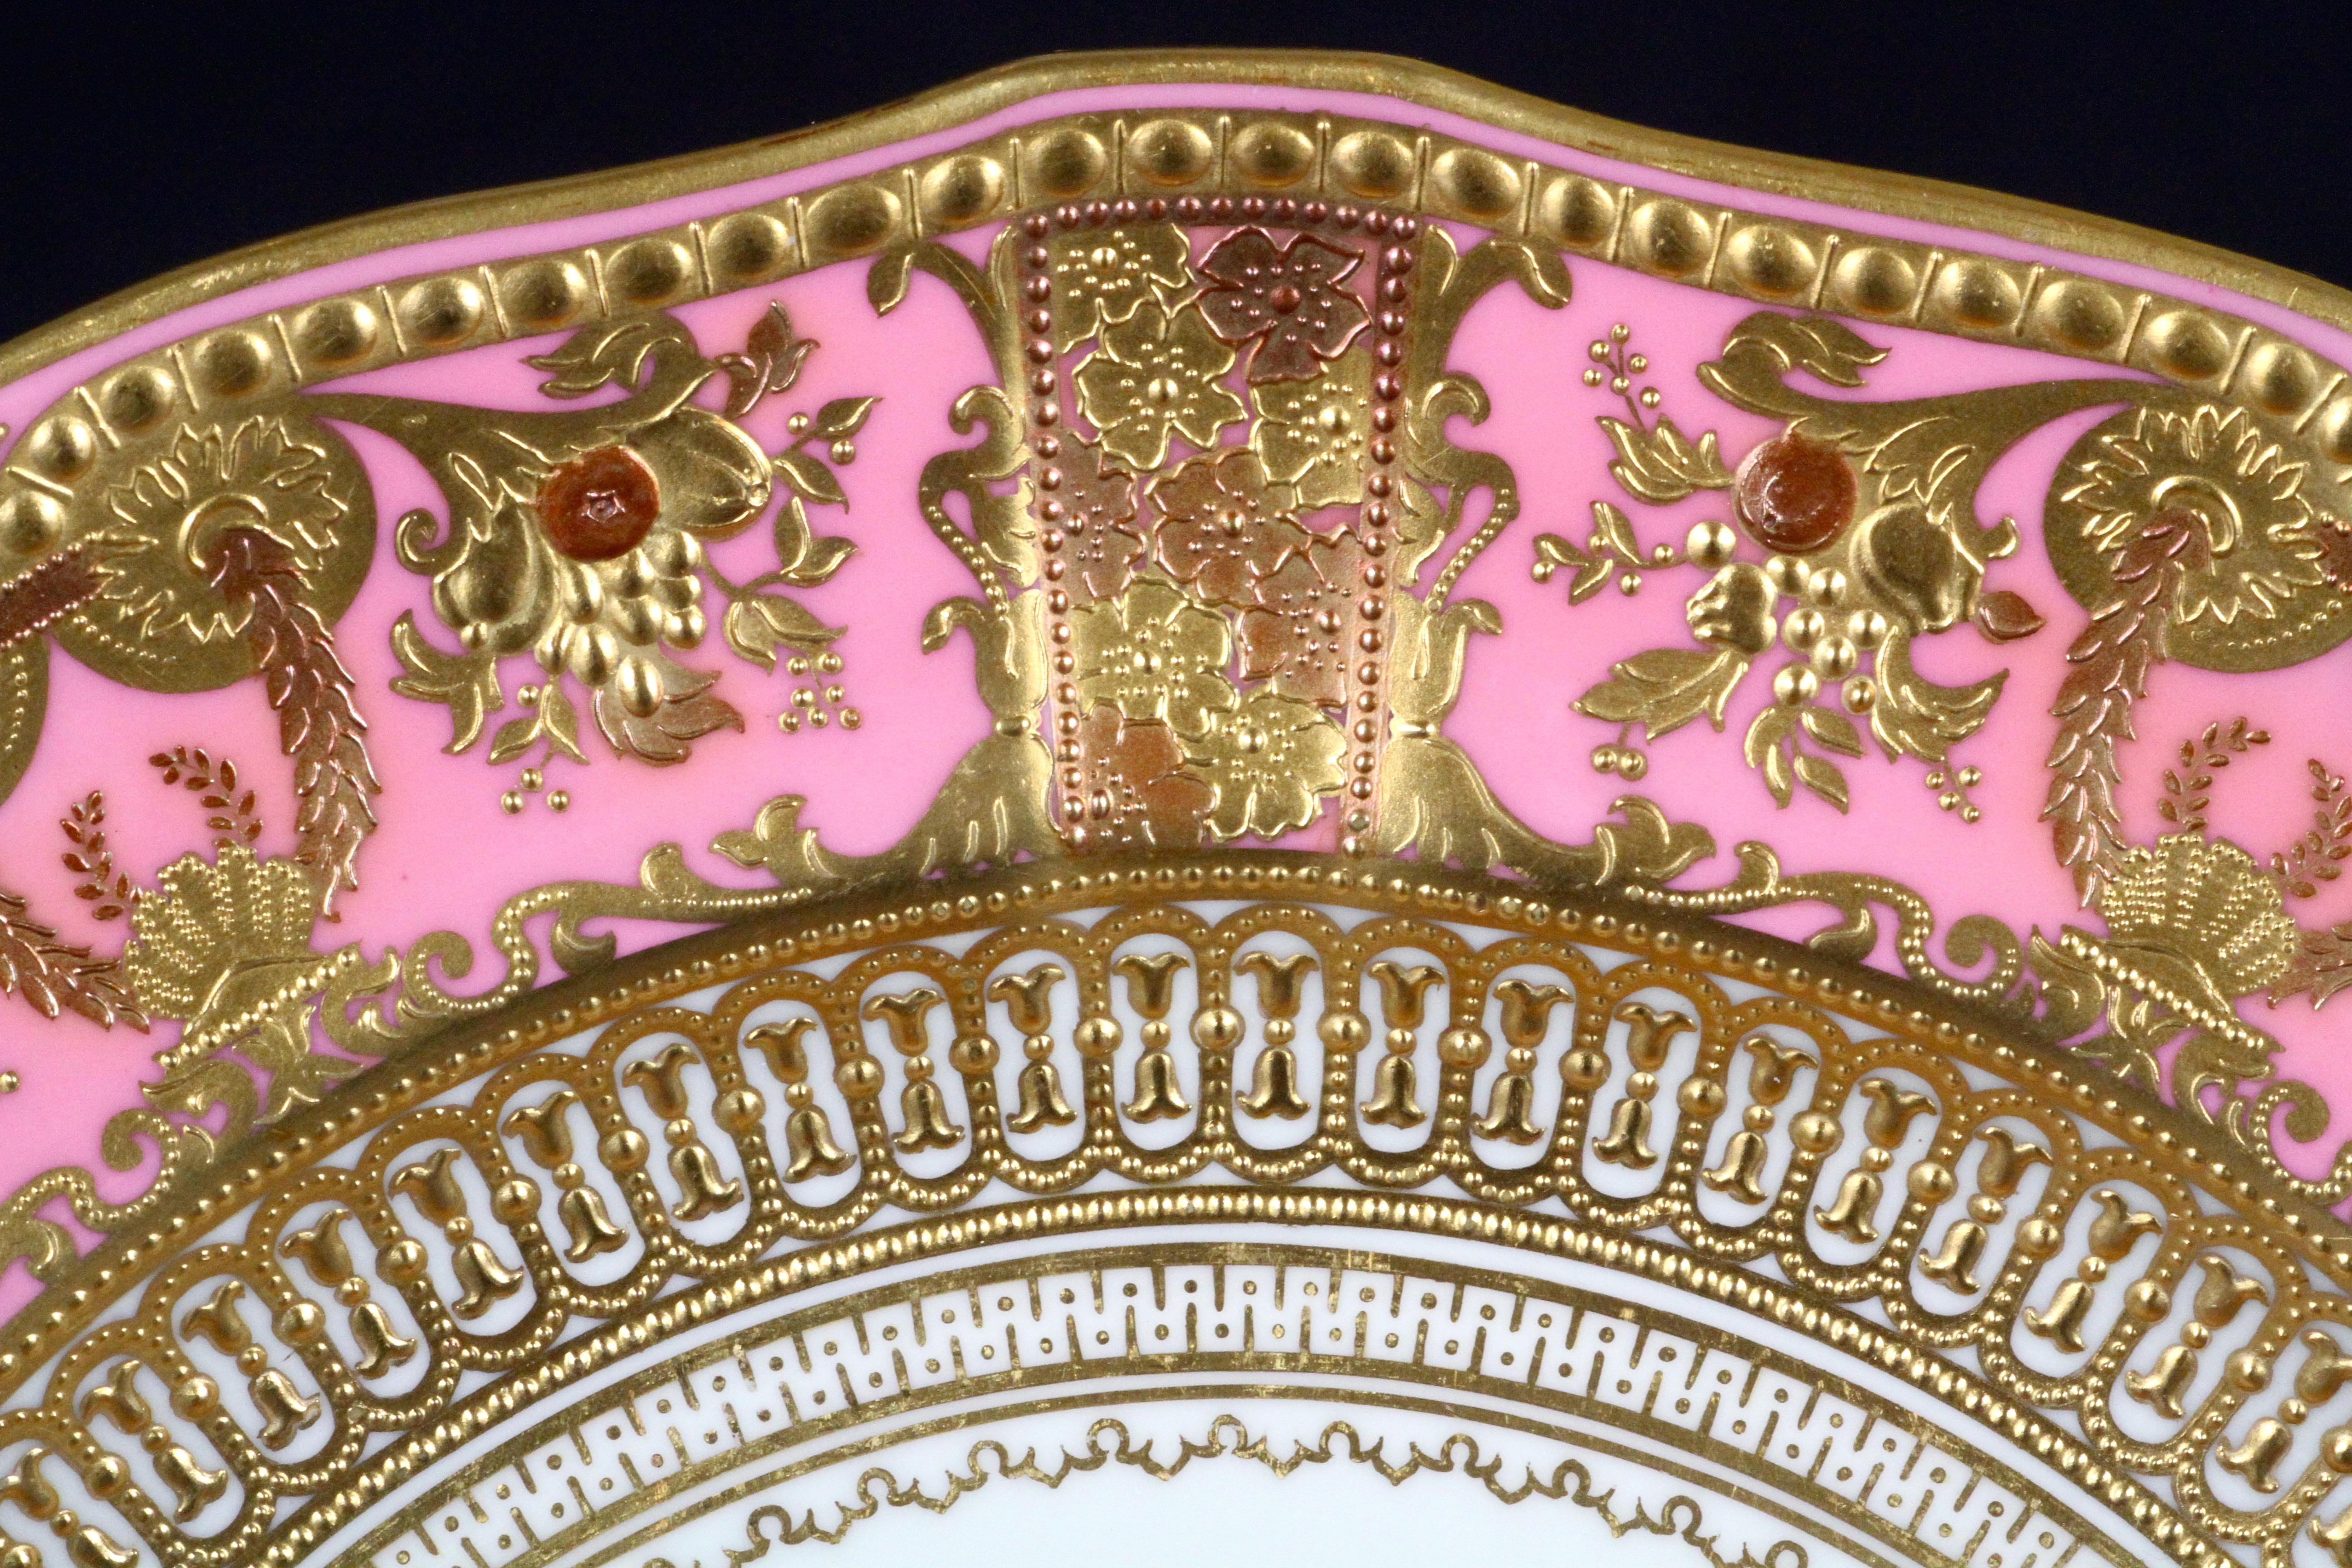 Late 19th Century Service of 19th Century Derby Pink Service Plates with Elaborate 2-Color Gilding